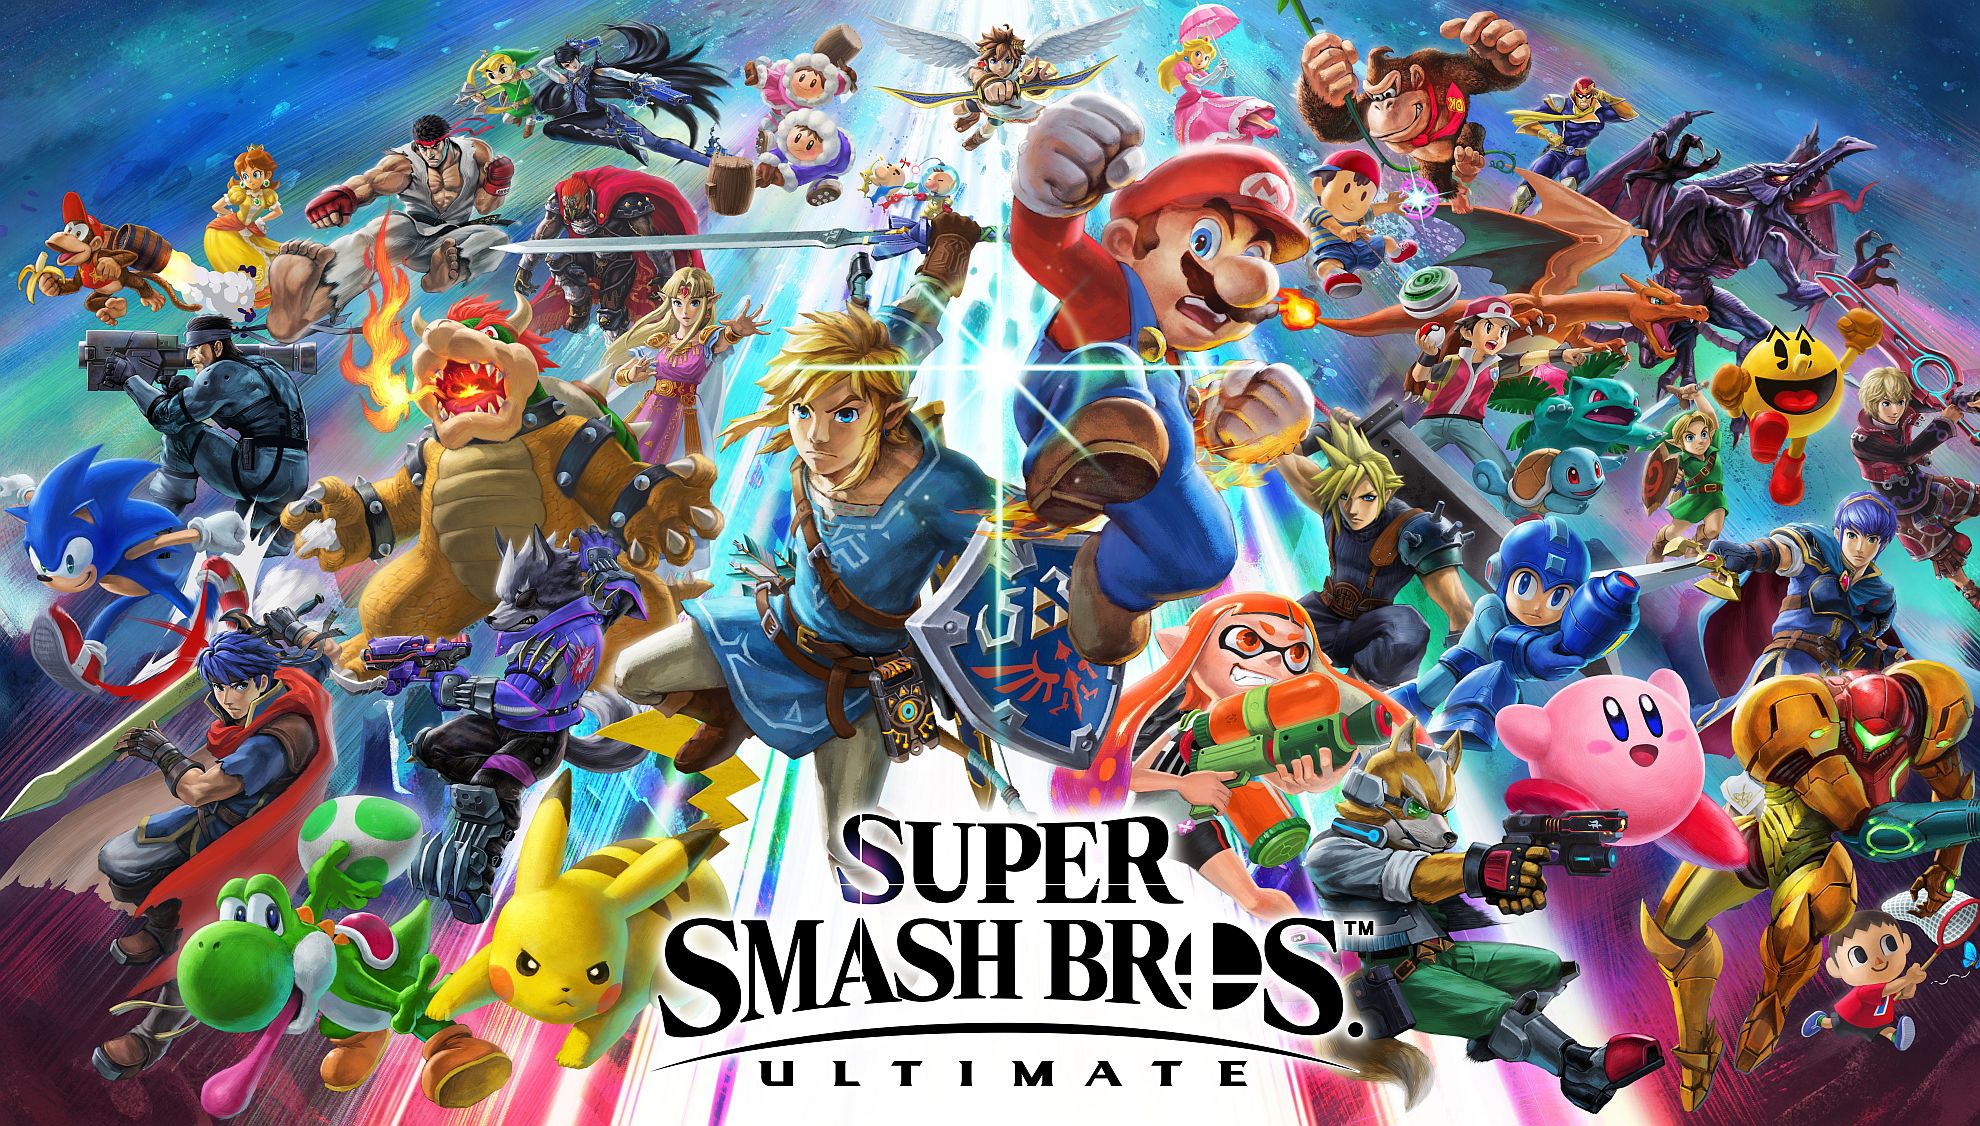 Image for Super Smash Bros. Ultimate DLC - watch the final character reveal here